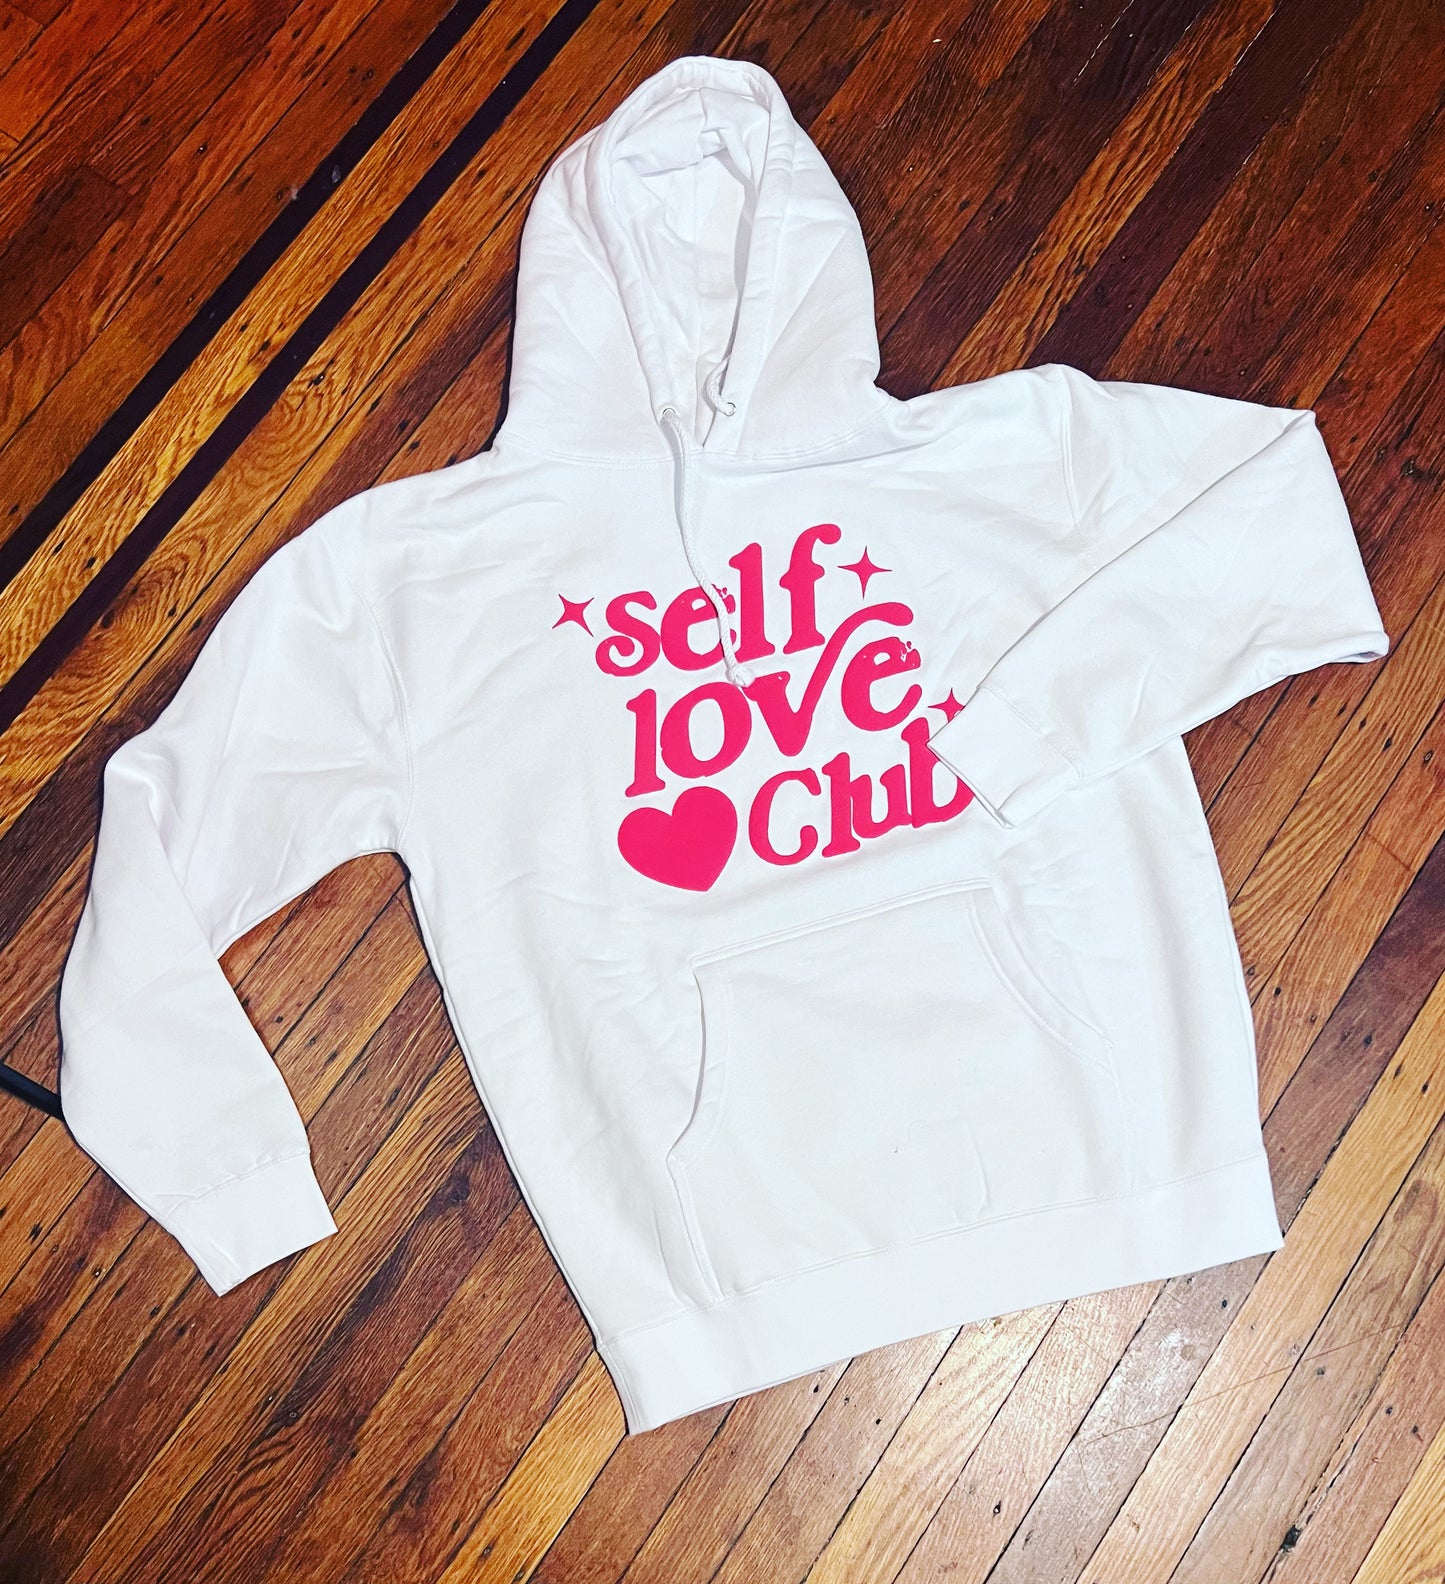 White and Red "self love club" hoodie